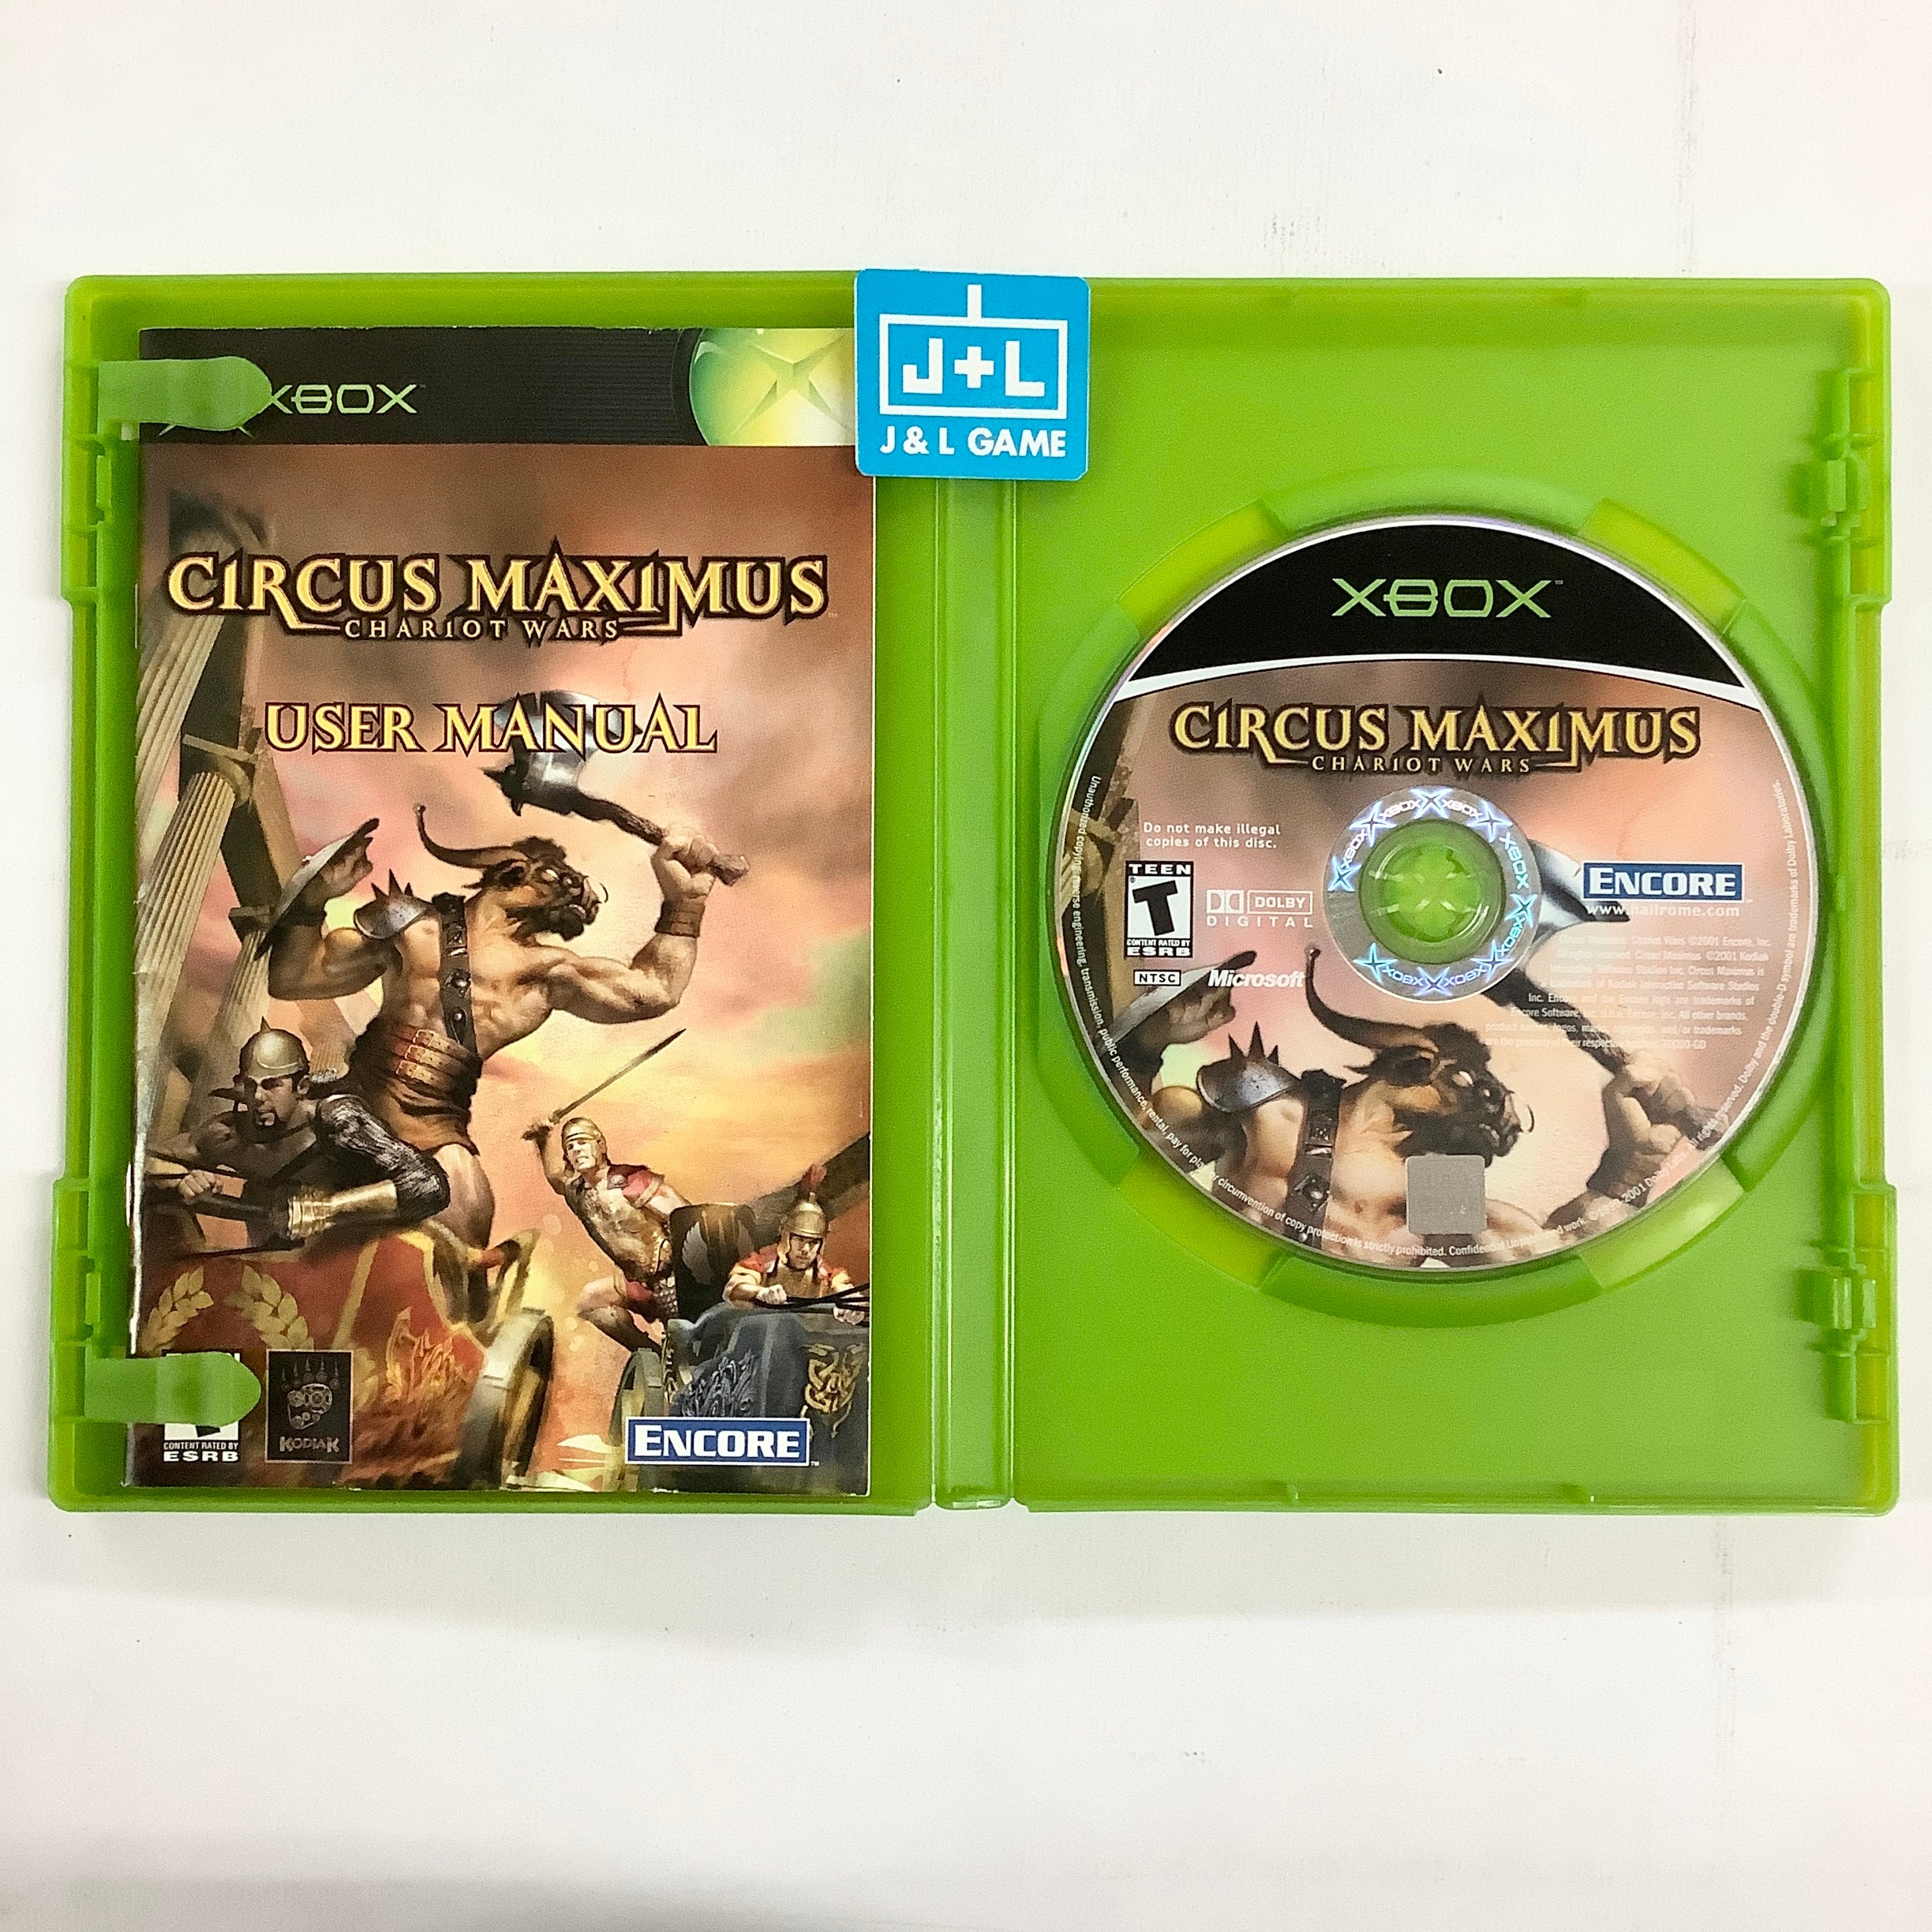 Circus Maximus: Chariot Wars - (XB) Xbox [Pre-Owned] Video Games Encore Software   